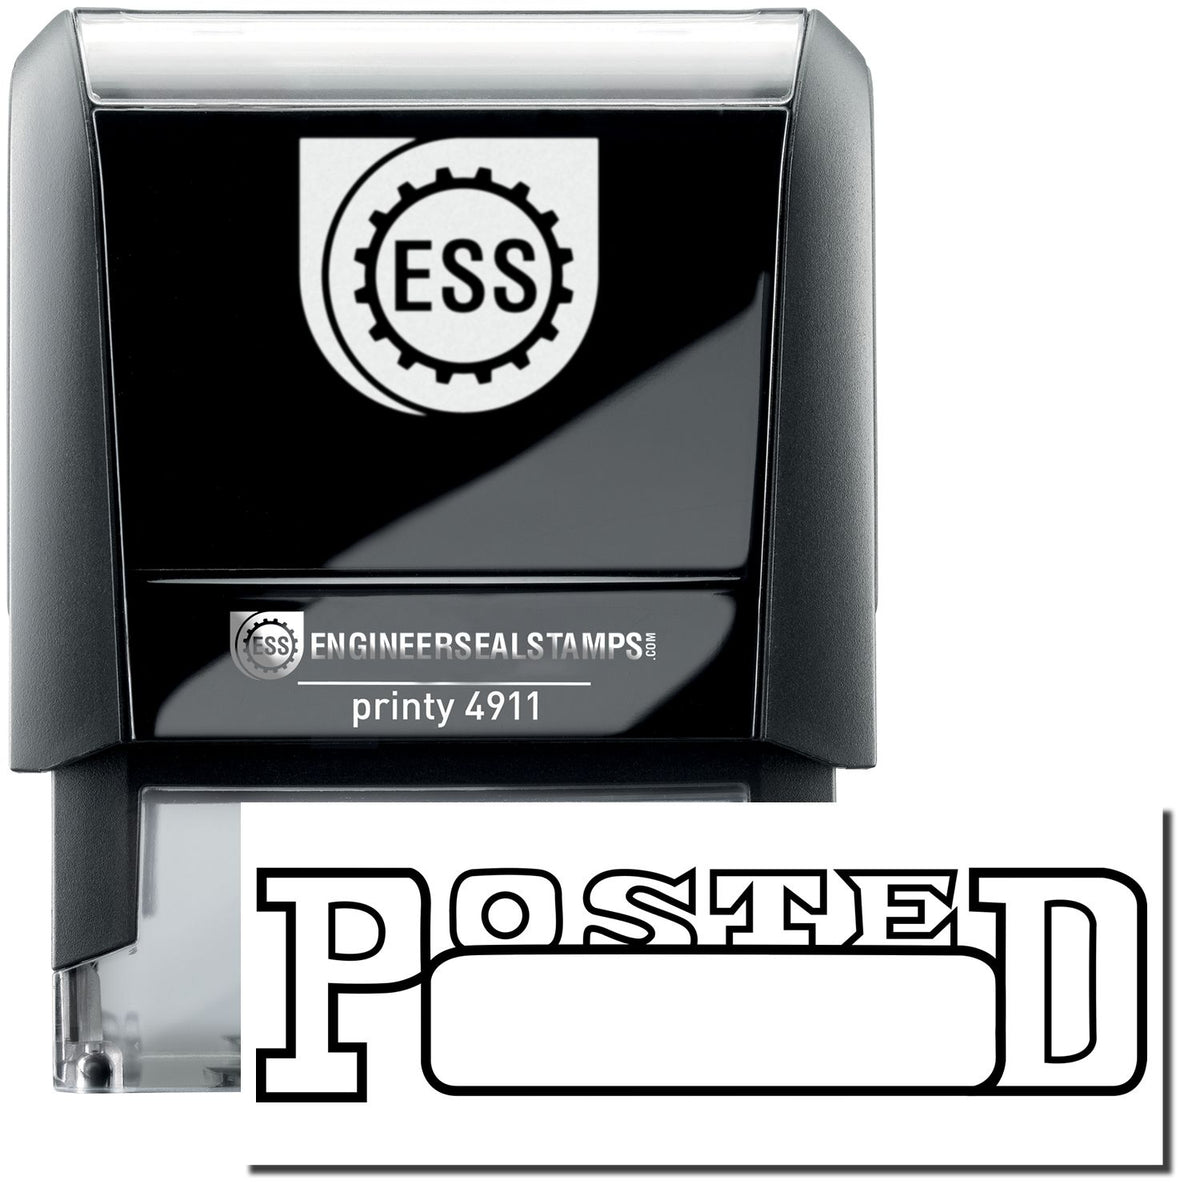 A self-inking stamp with a stamped image showing how the text &quot;POSTED&quot; with a date box under it is displayed after stamping.